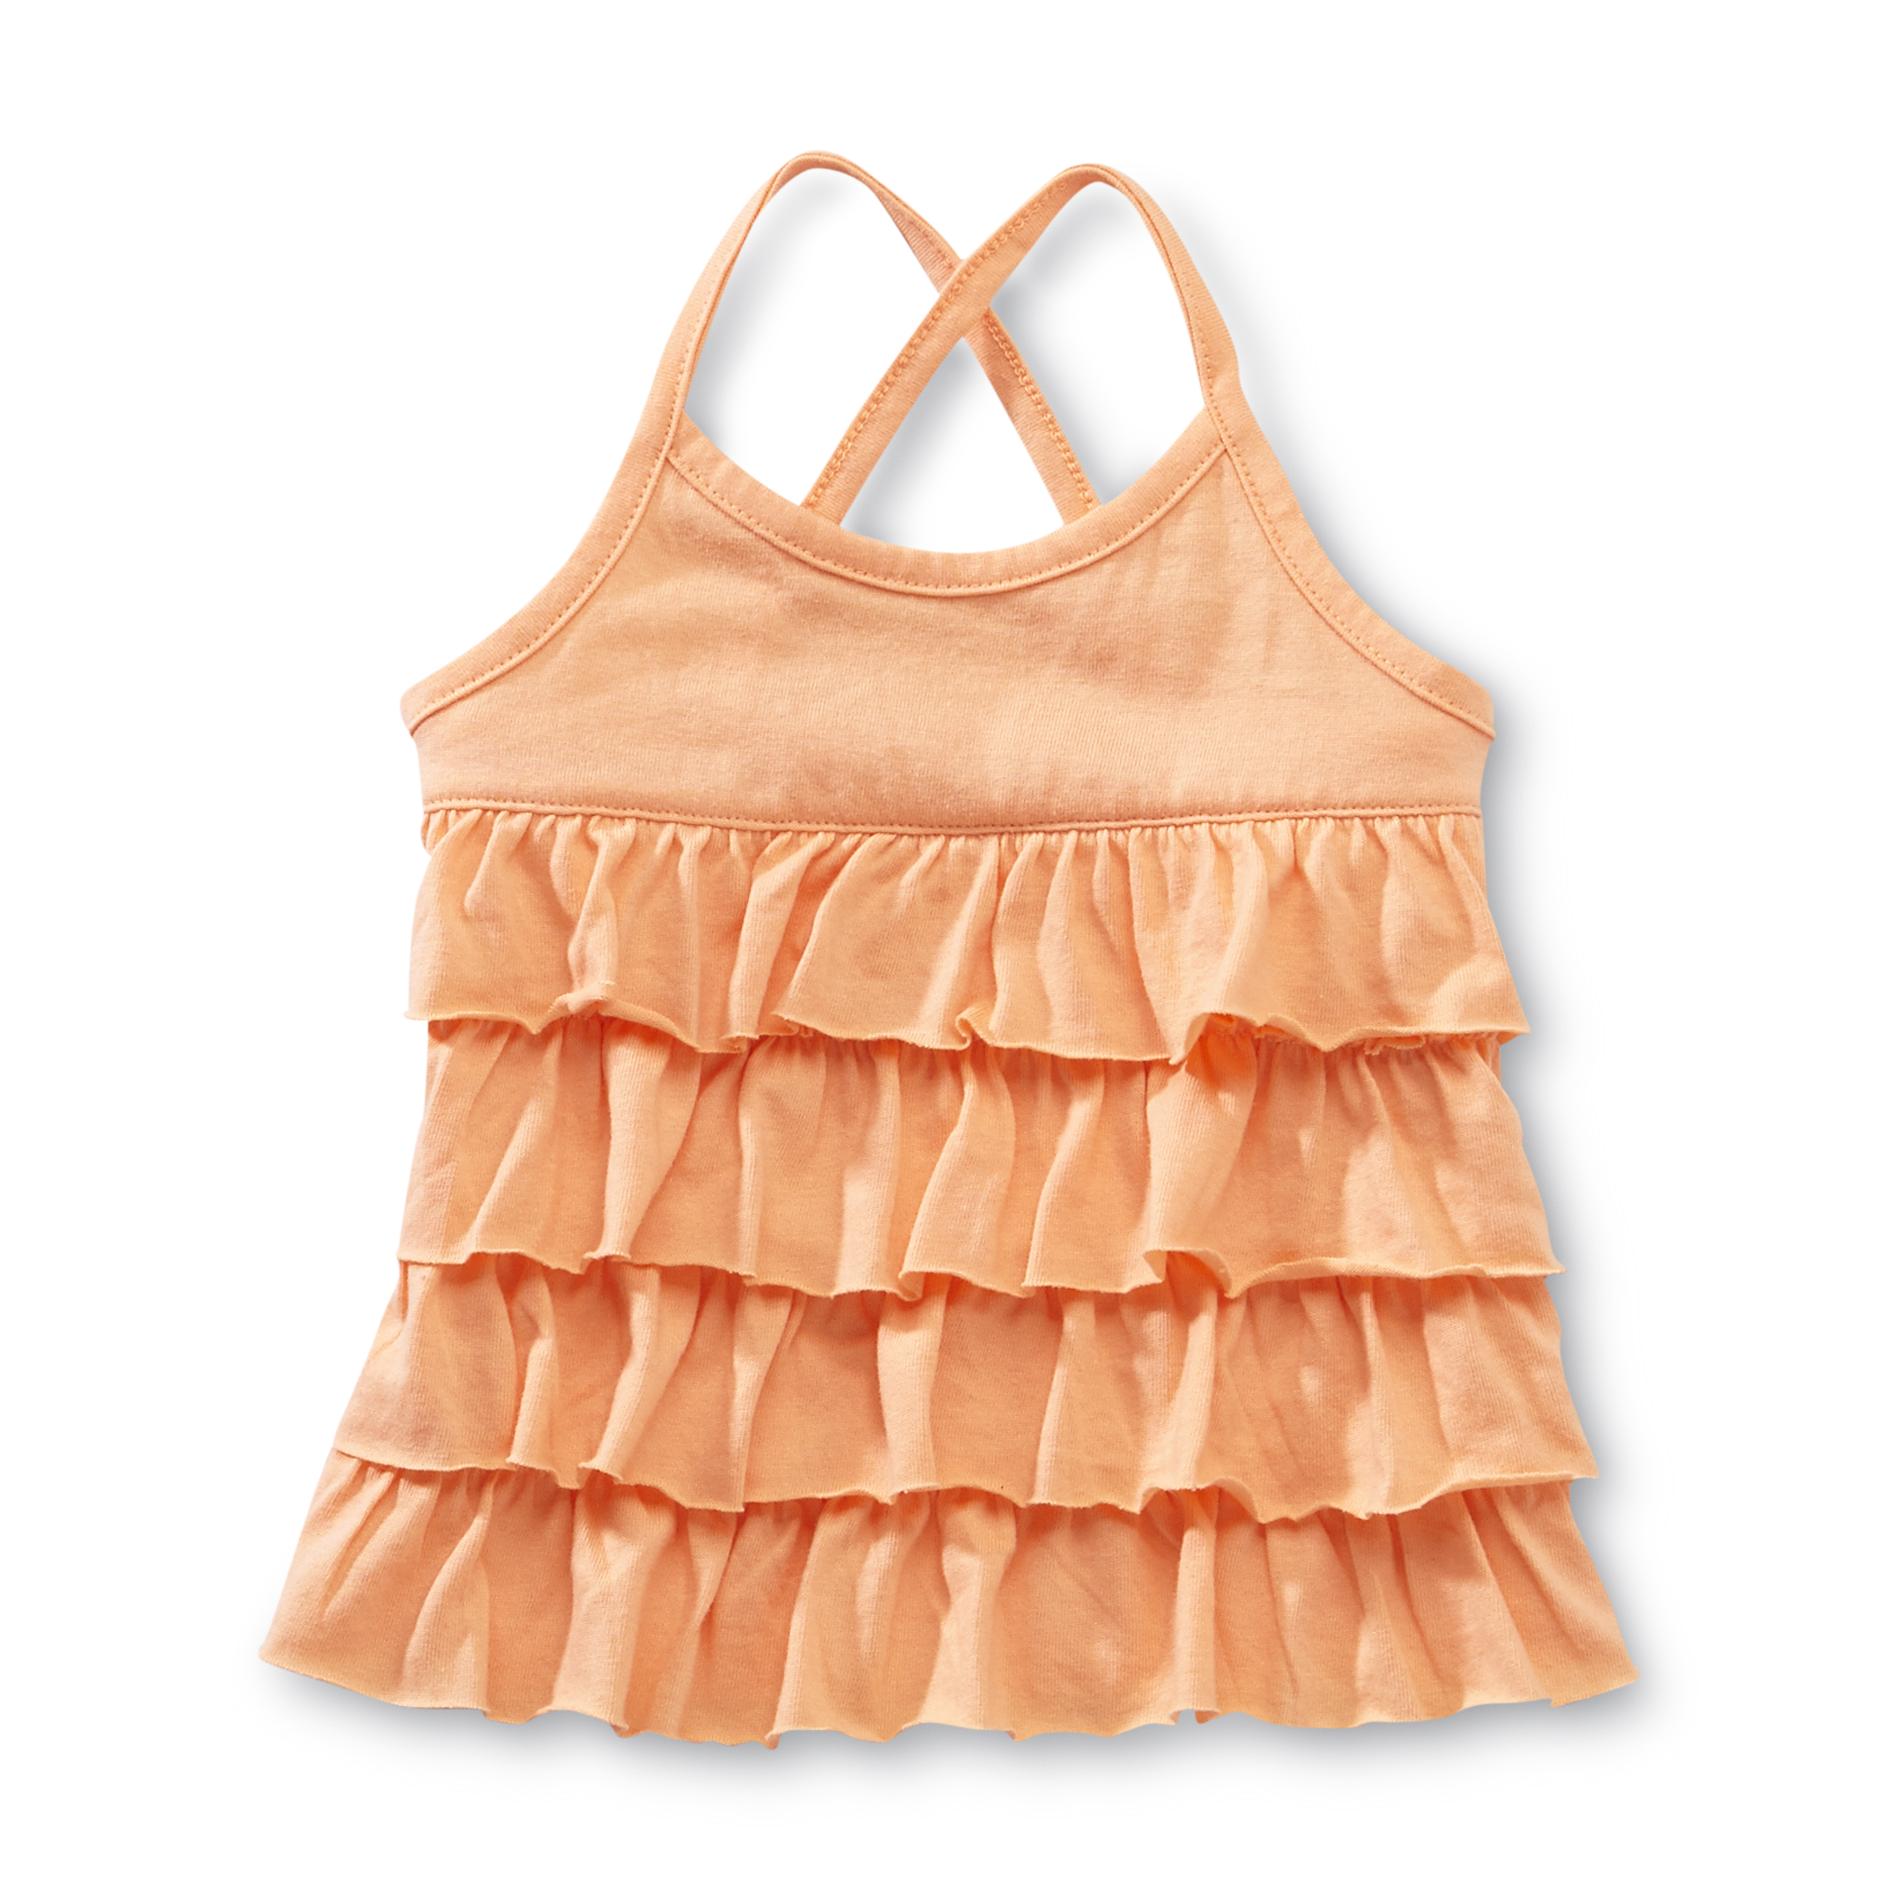 Toughskins Infant & Toddler Girl's Tiered Ruffle Tank Top